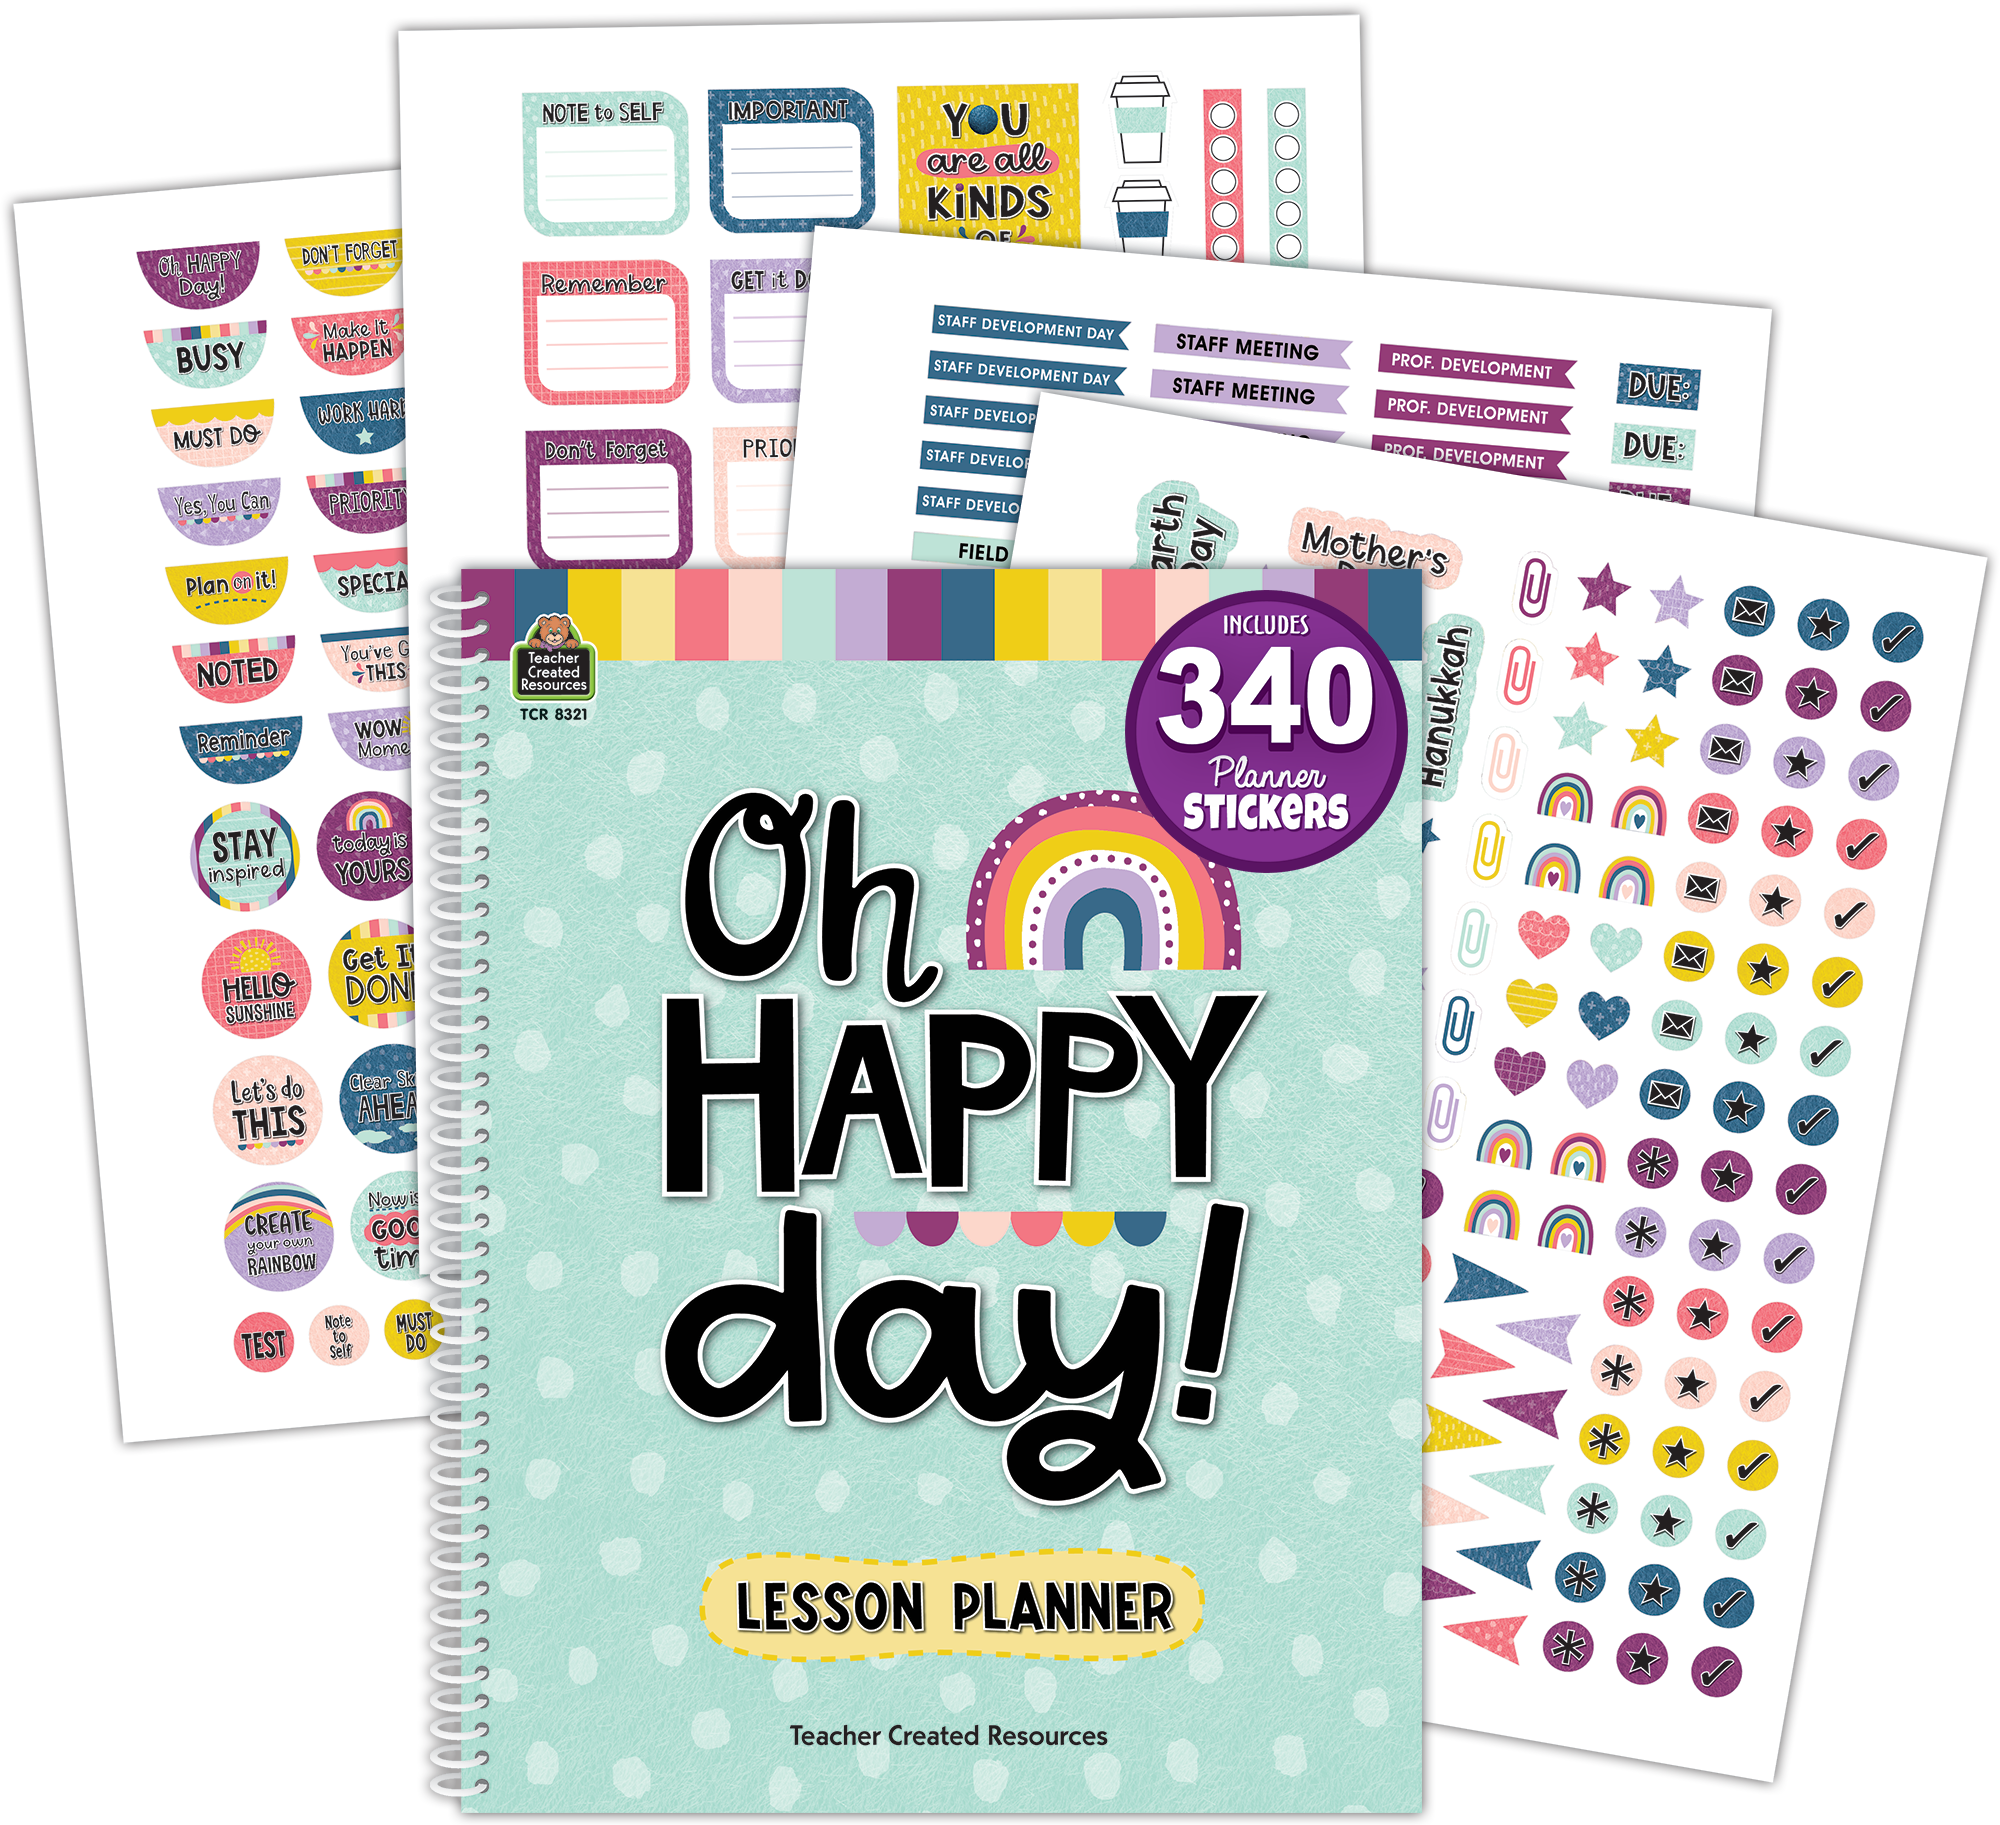 Includes 340 planner stickers